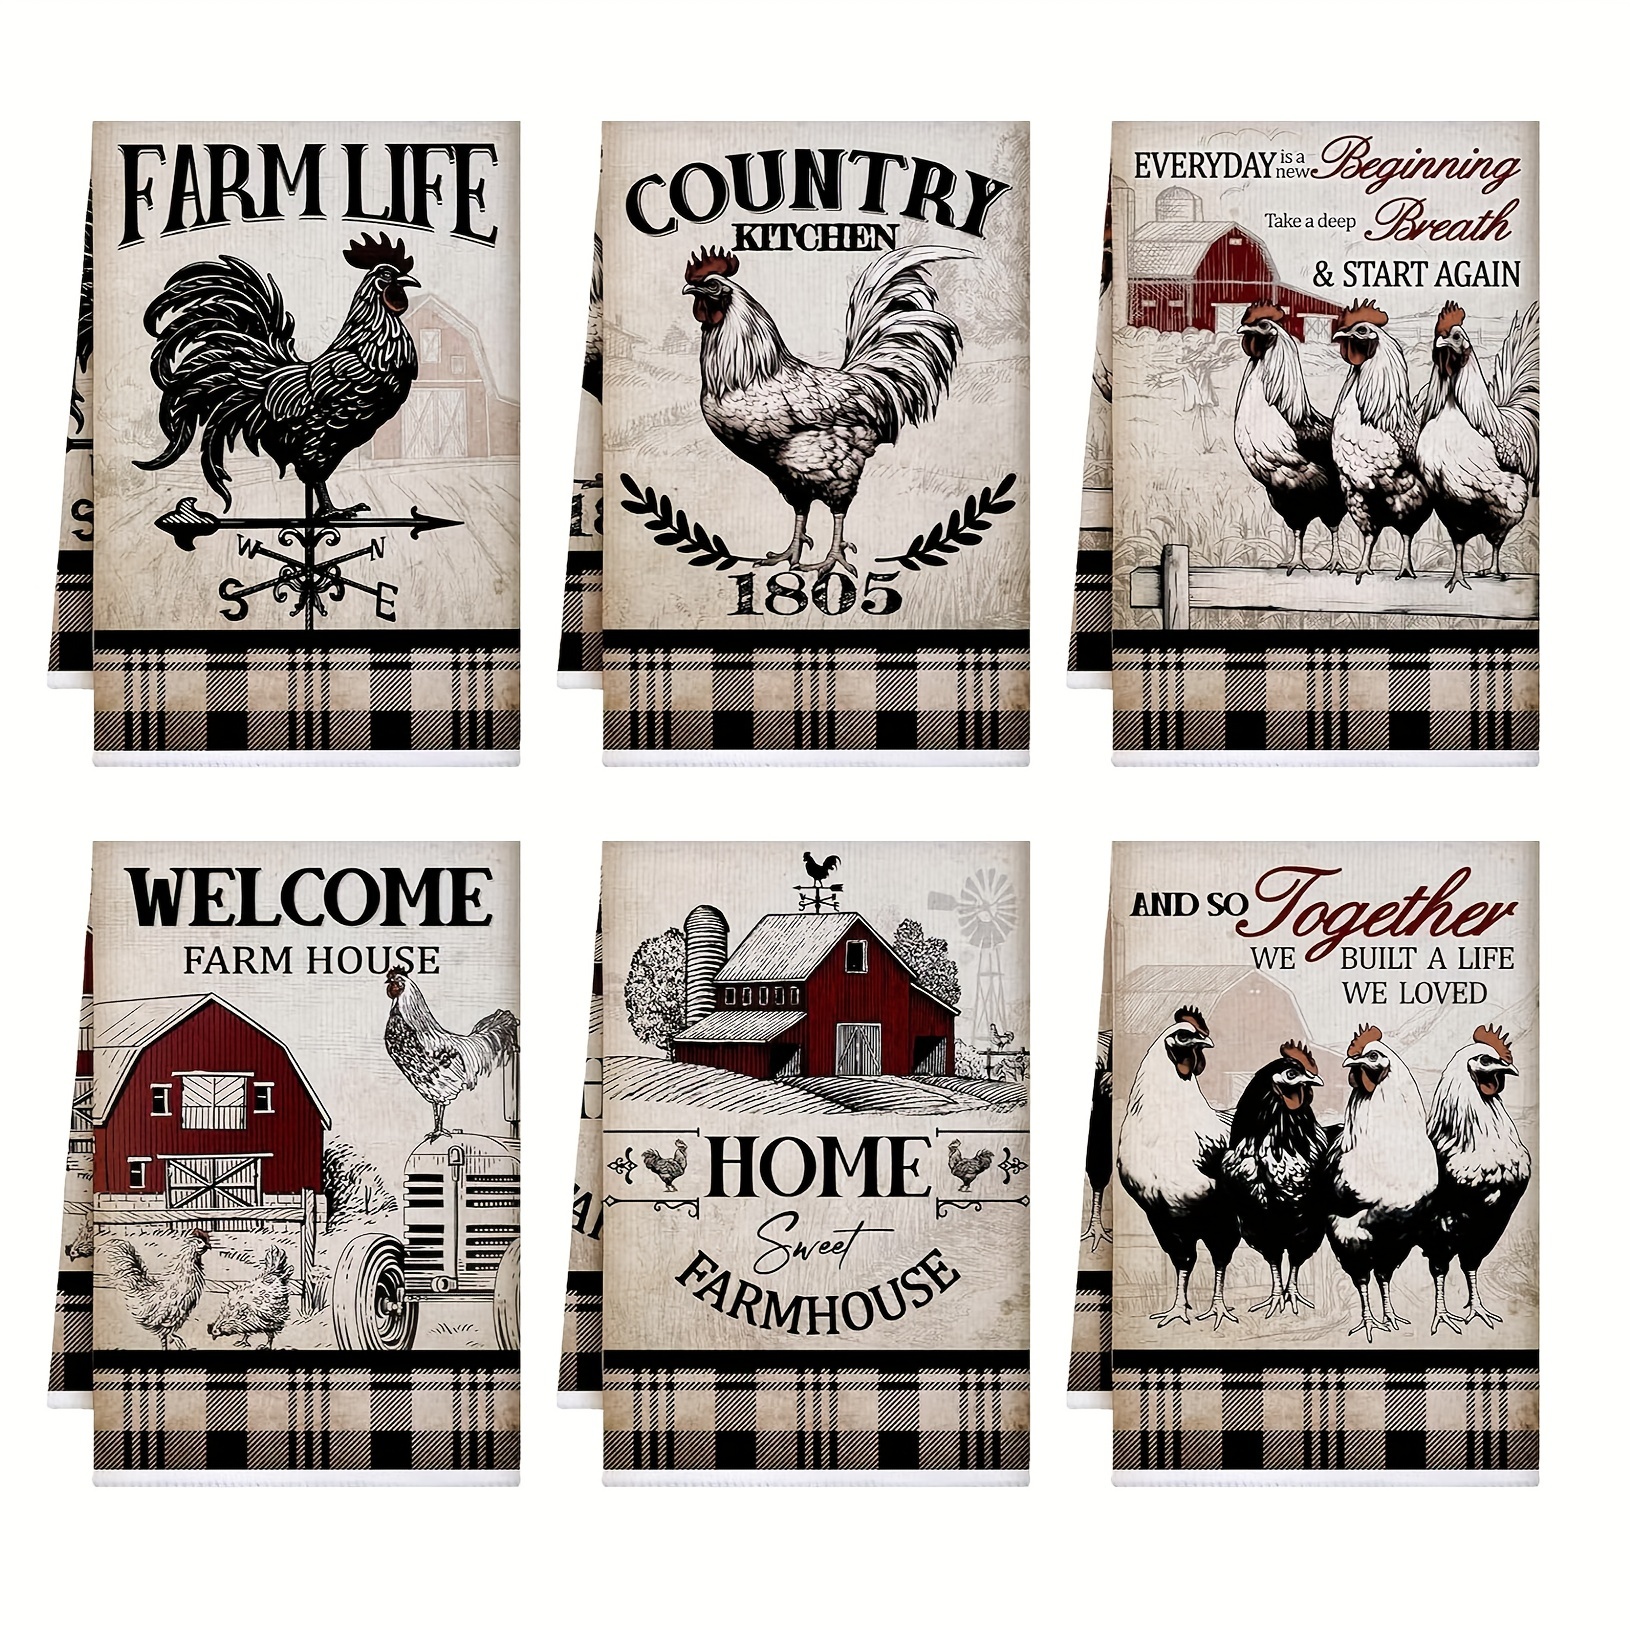 

2-piece Modern Kitchen Towels - Quick Dry, Super Absorbent Dish Cloths With Animal Theme, Decorative Tea Towels For Cooking & Baking, Reusable Cleaning Rags, 16x24 Inches - Gray Barn Farm Design